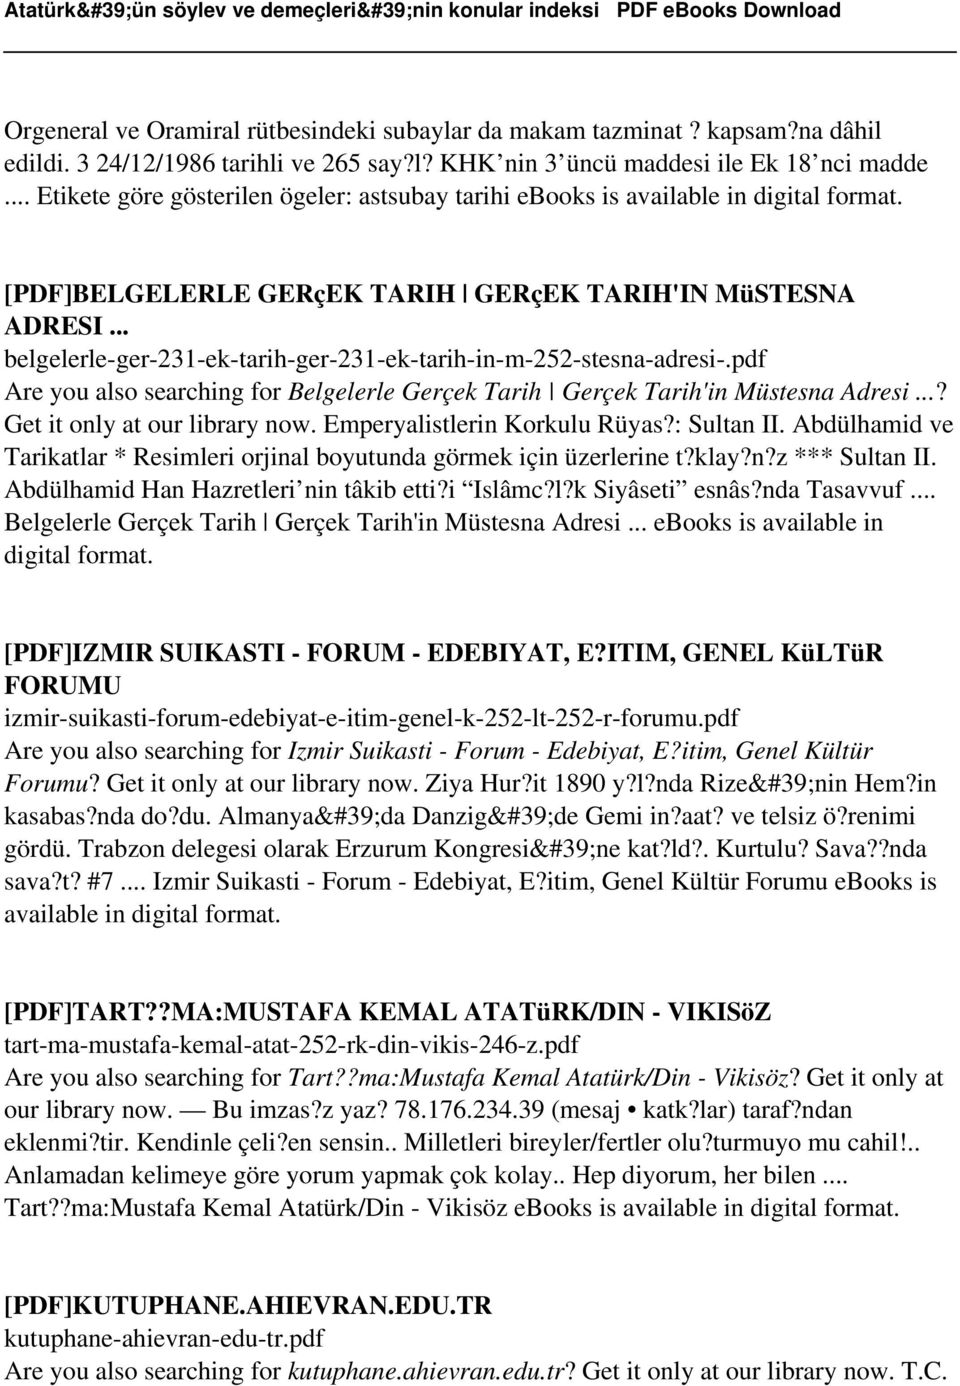 .. belgelerle-ger-231-ek-tarih-ger-231-ek-tarih-in-m-252-stesna-adresi-.pdf Are you also searching for Belgelerle Gerçek Tarih Gerçek Tarih'in Müstesna Adresi...? Get it only at our library now.